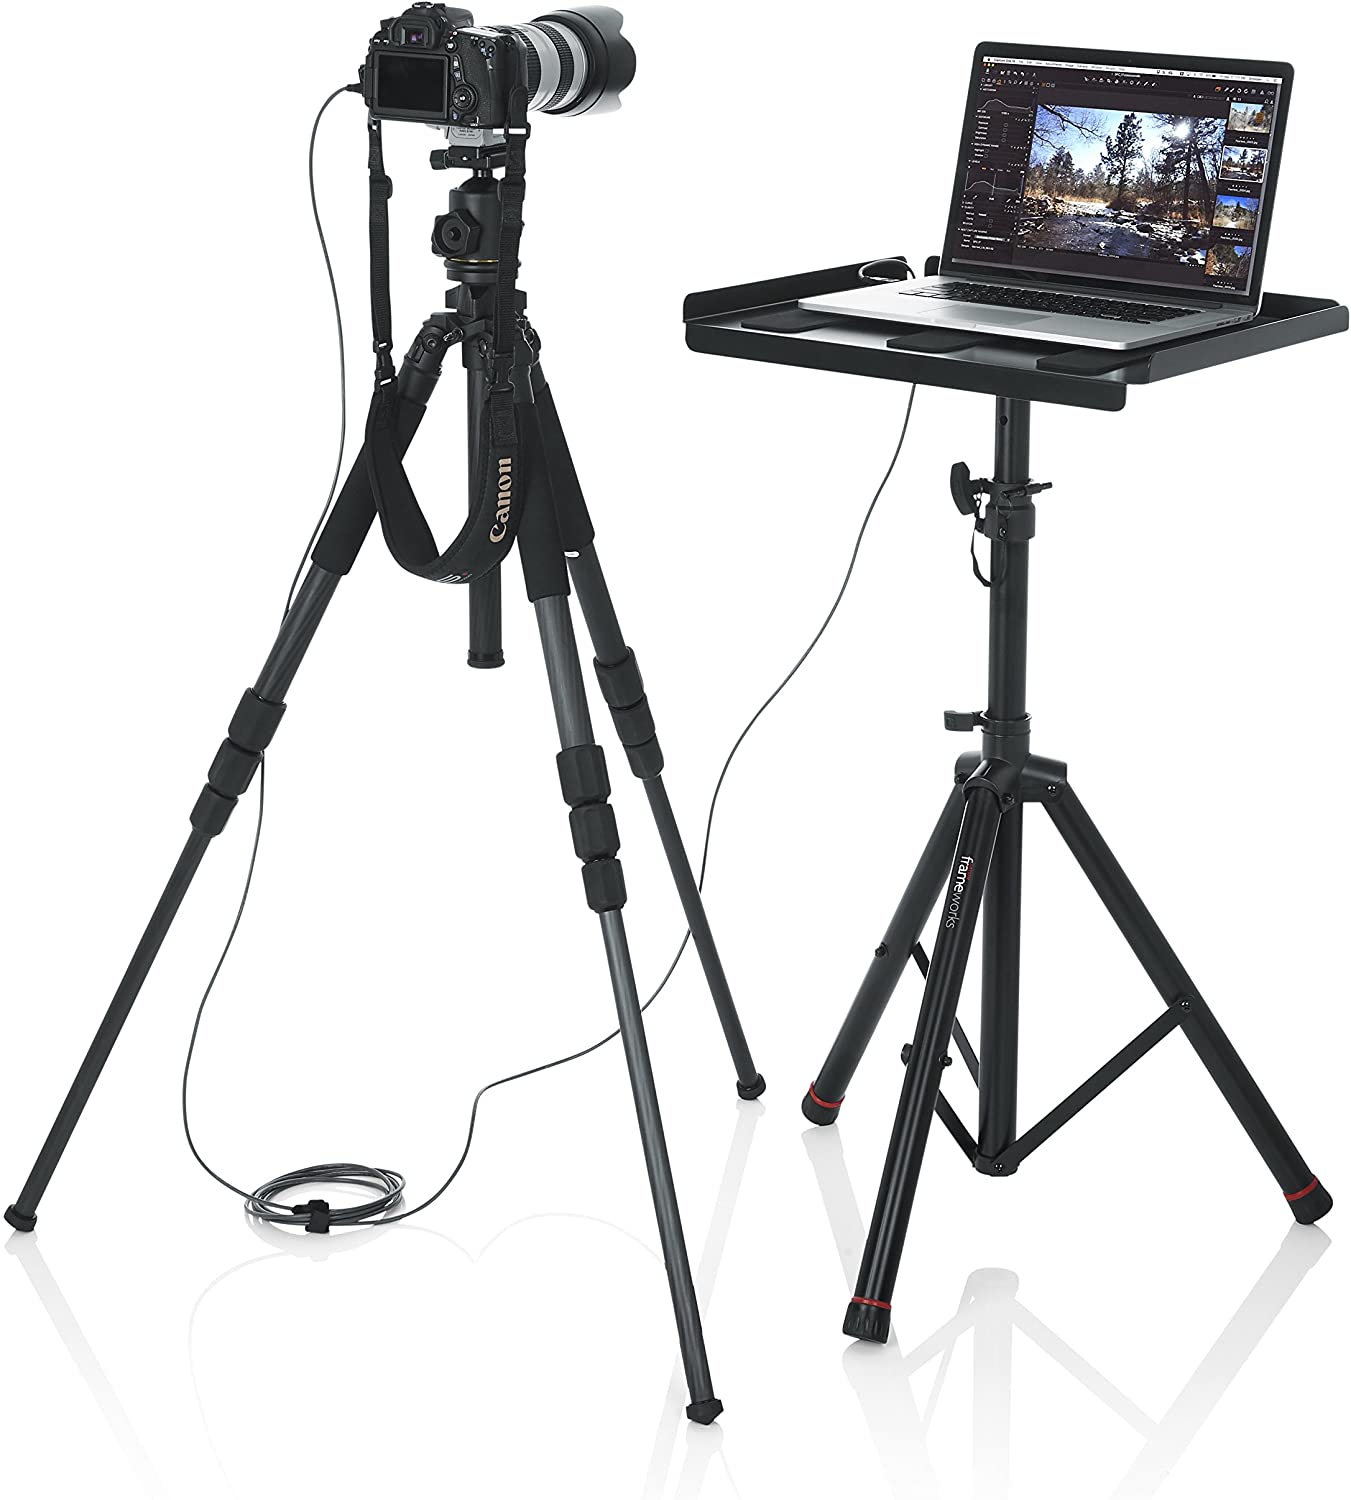 Gator Frameworks Heavy Duty Deluxe Adjustable Multi-Media Gear Stand Featuring 100x100 Vesa Mounting Brackets | Ideal for Laptops and more - GFW-UTL-MEDIATRAY2 - Pro-Distributing